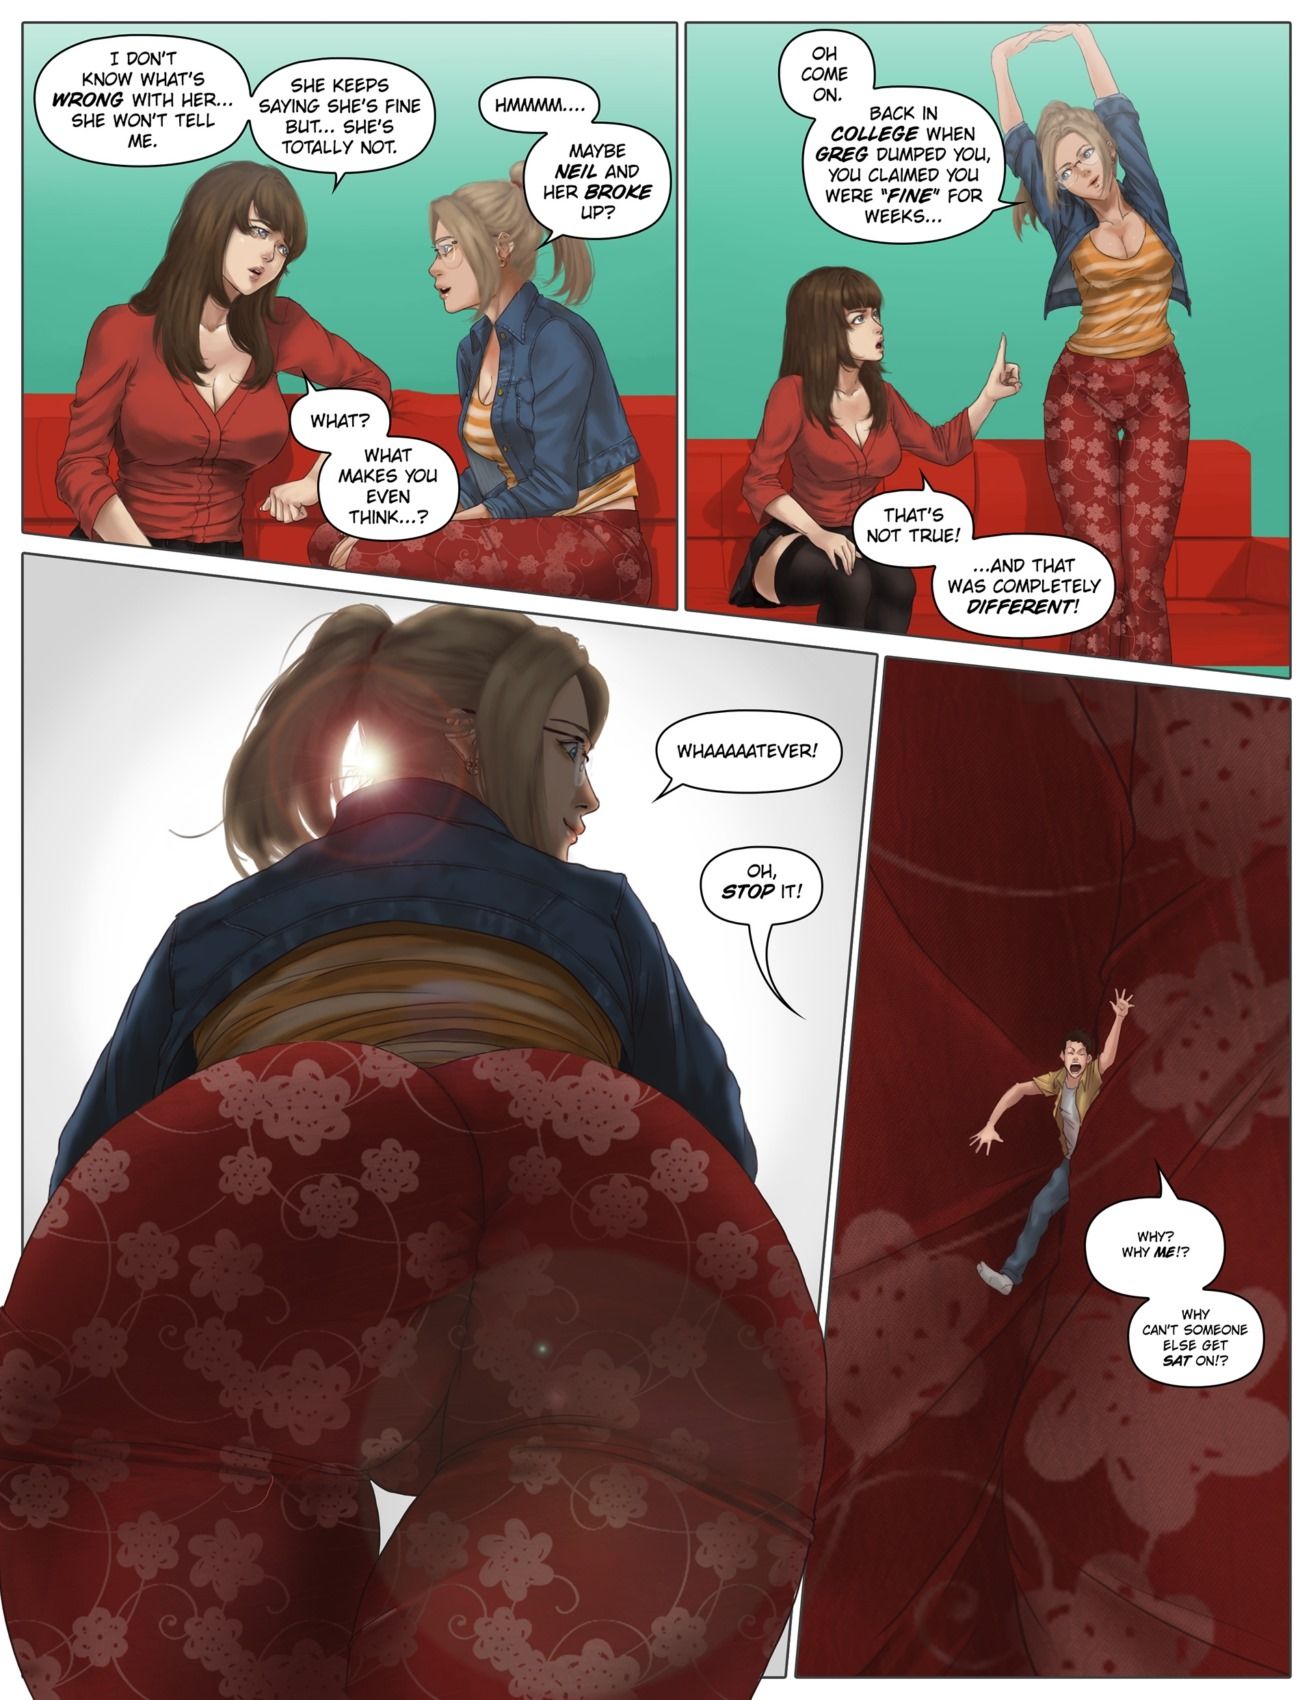 A Weekend Alone Issue 07 by Giantess Fan page 7